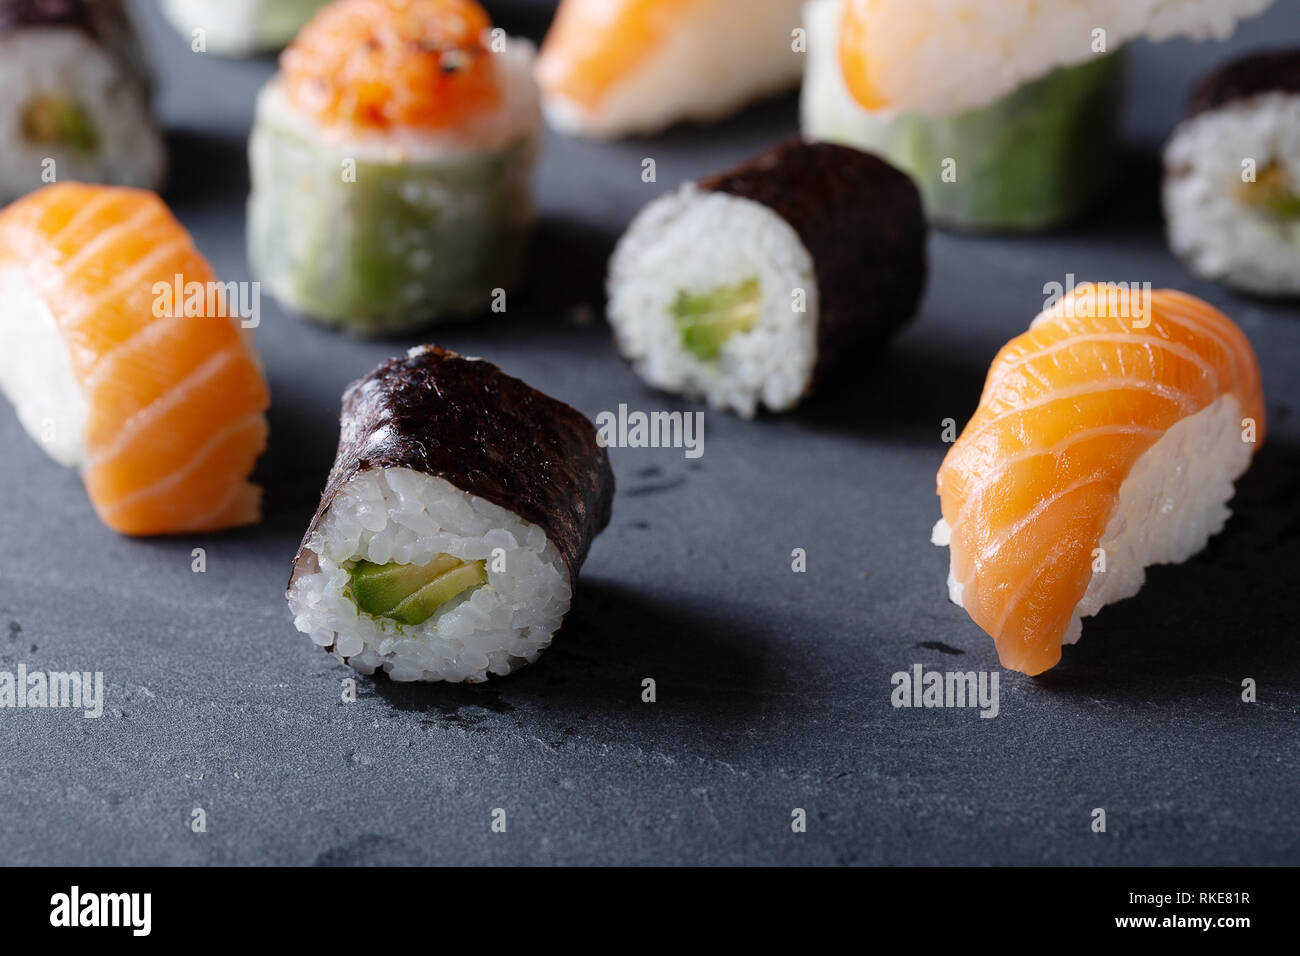 Fresh seafood sushi meal on darck background Stock Photo